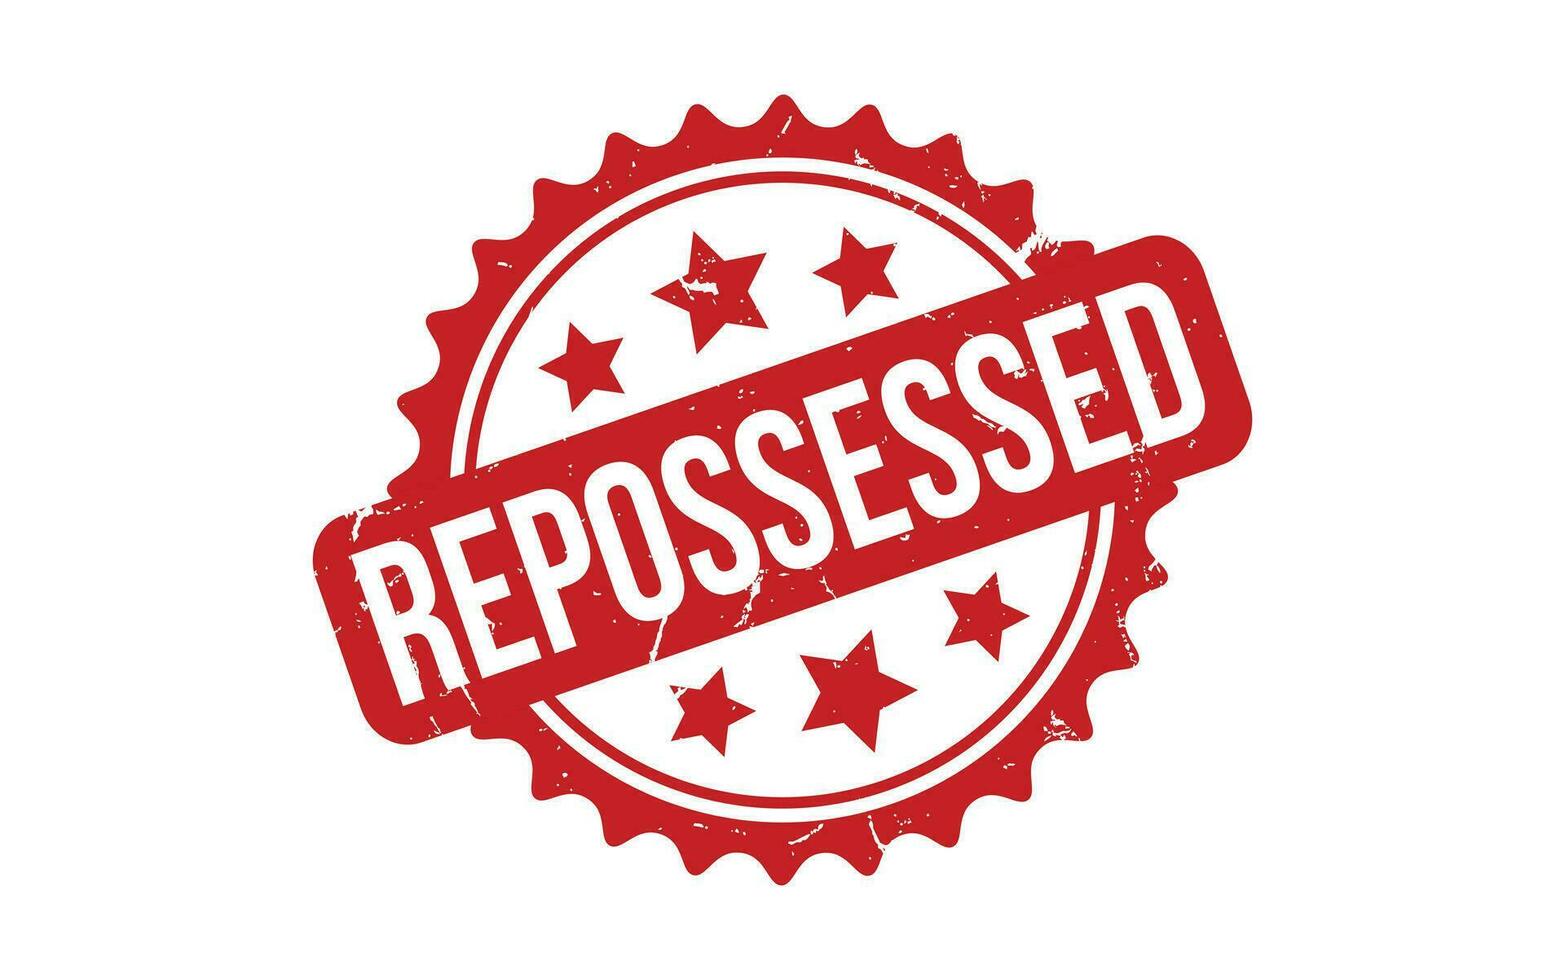 Repossessed rubber grunge stamp seal vector